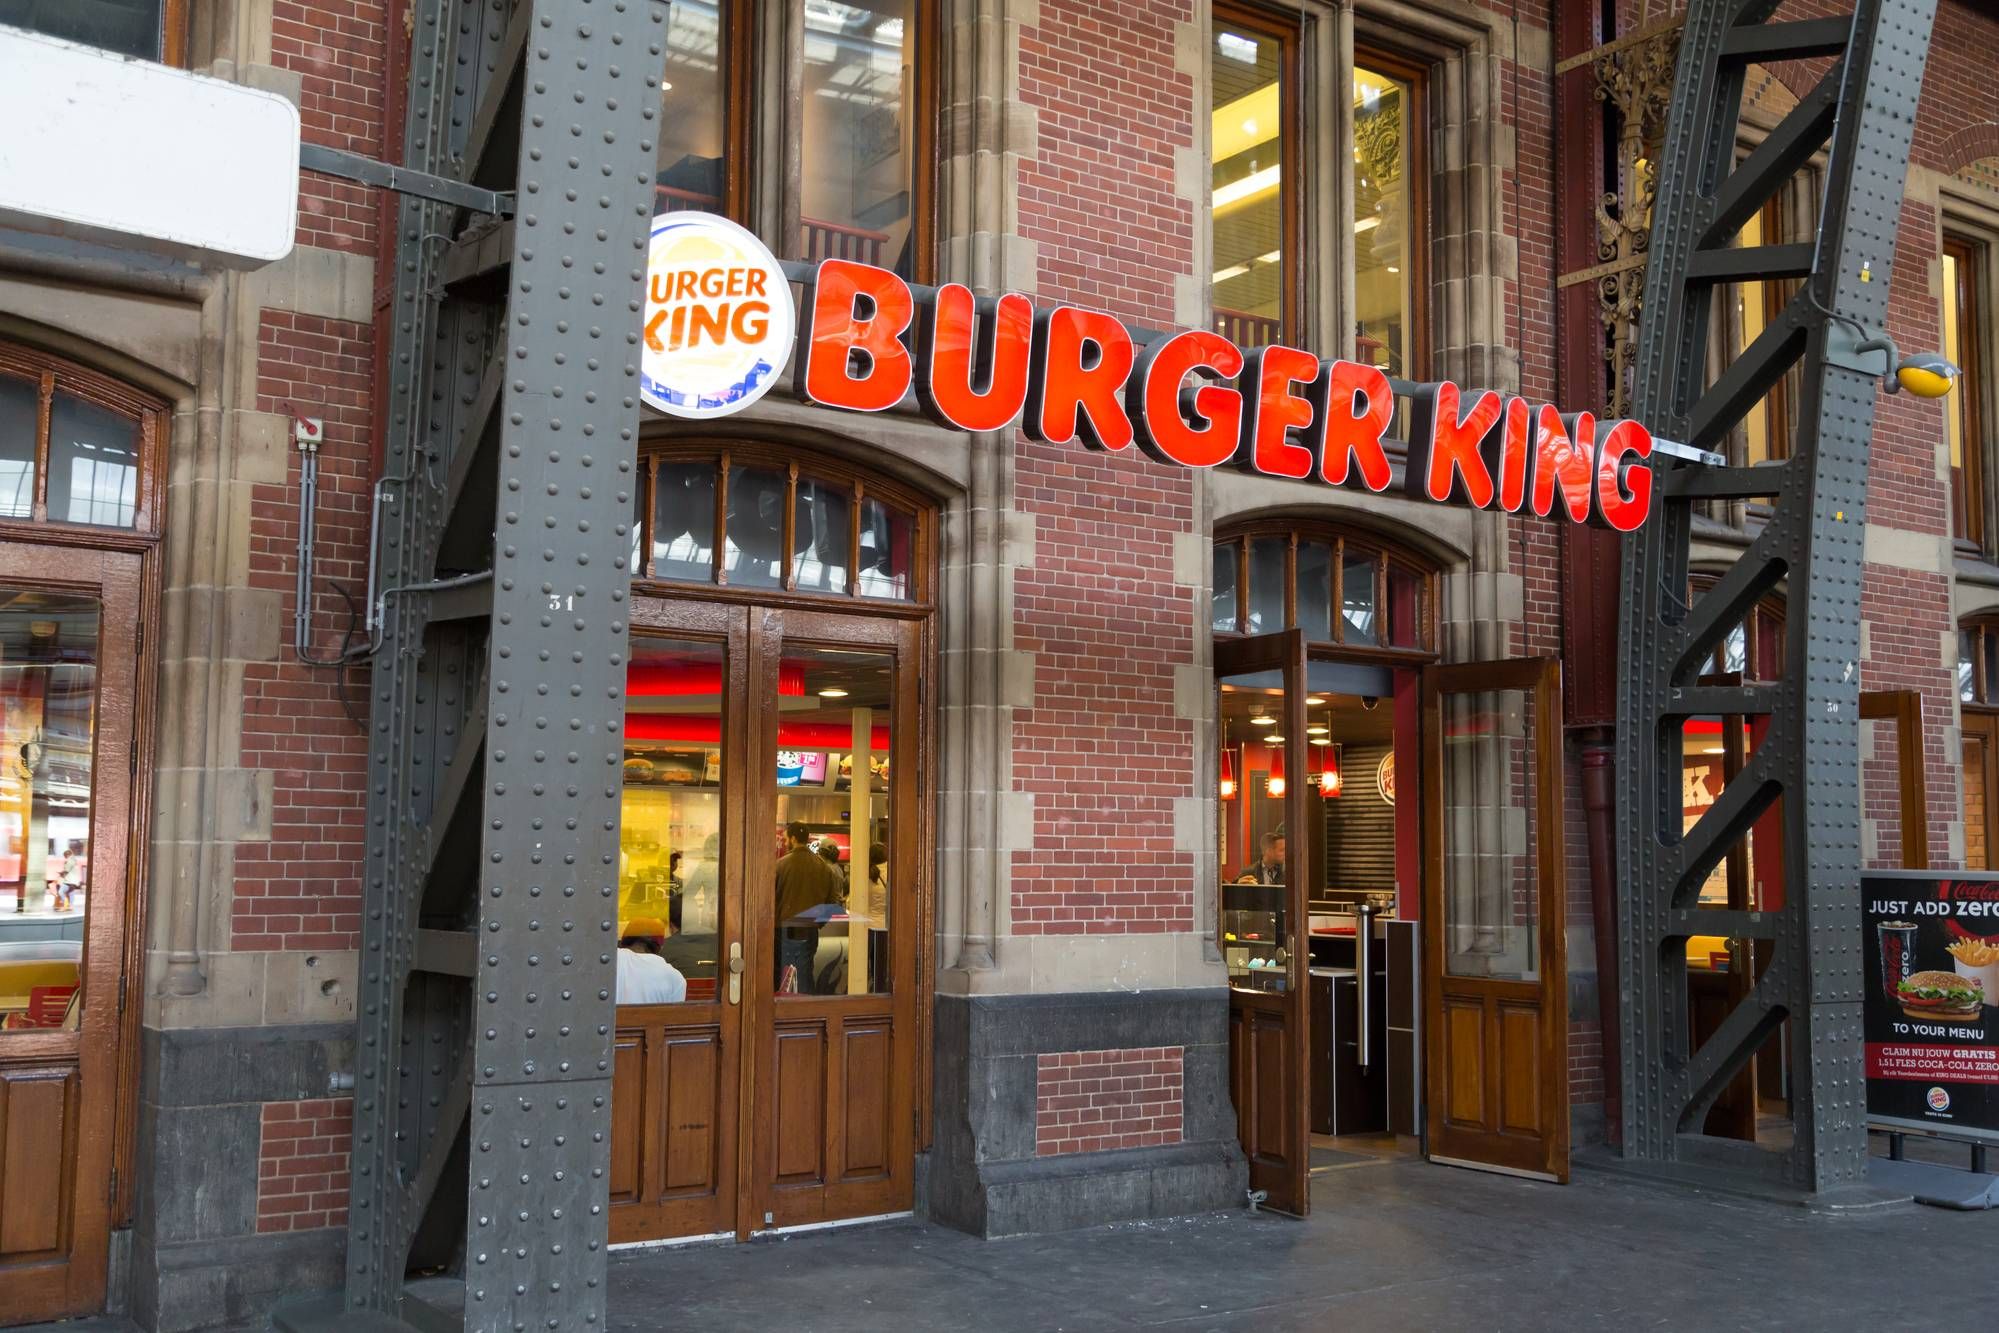 Burger King allegedly shaves time off workers' timecards.